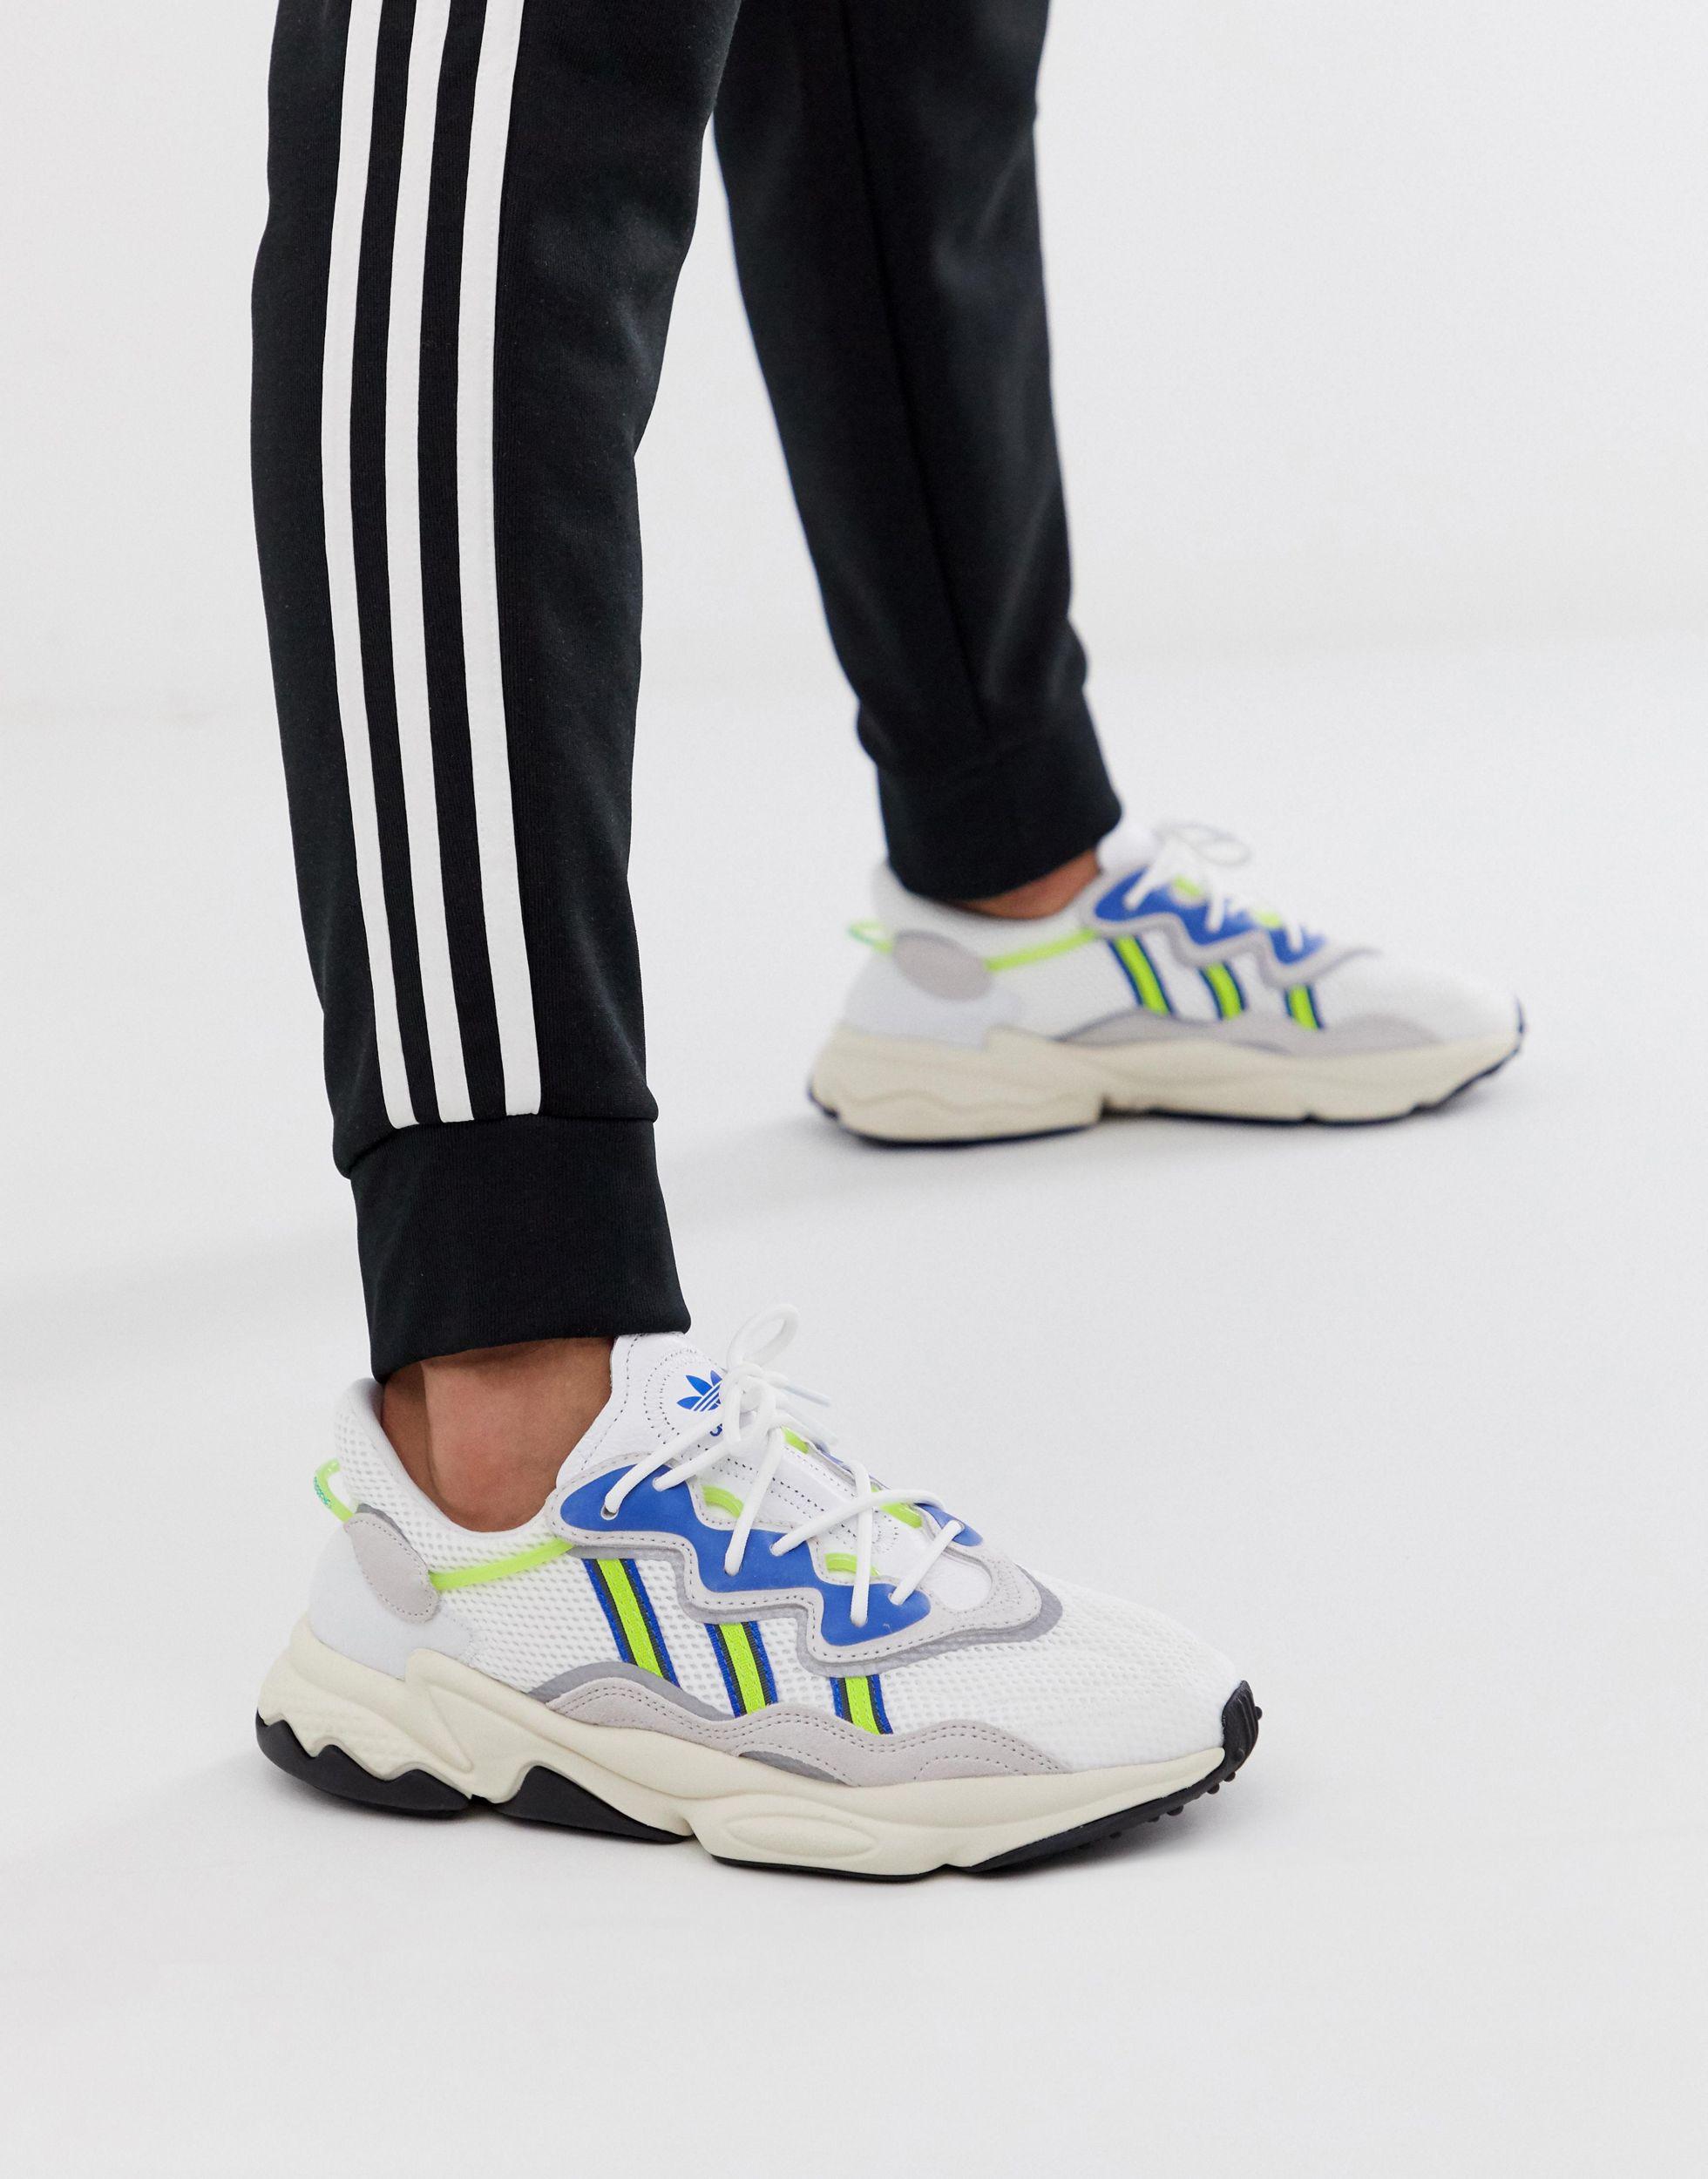 adidas originals ozweego sneakers in white